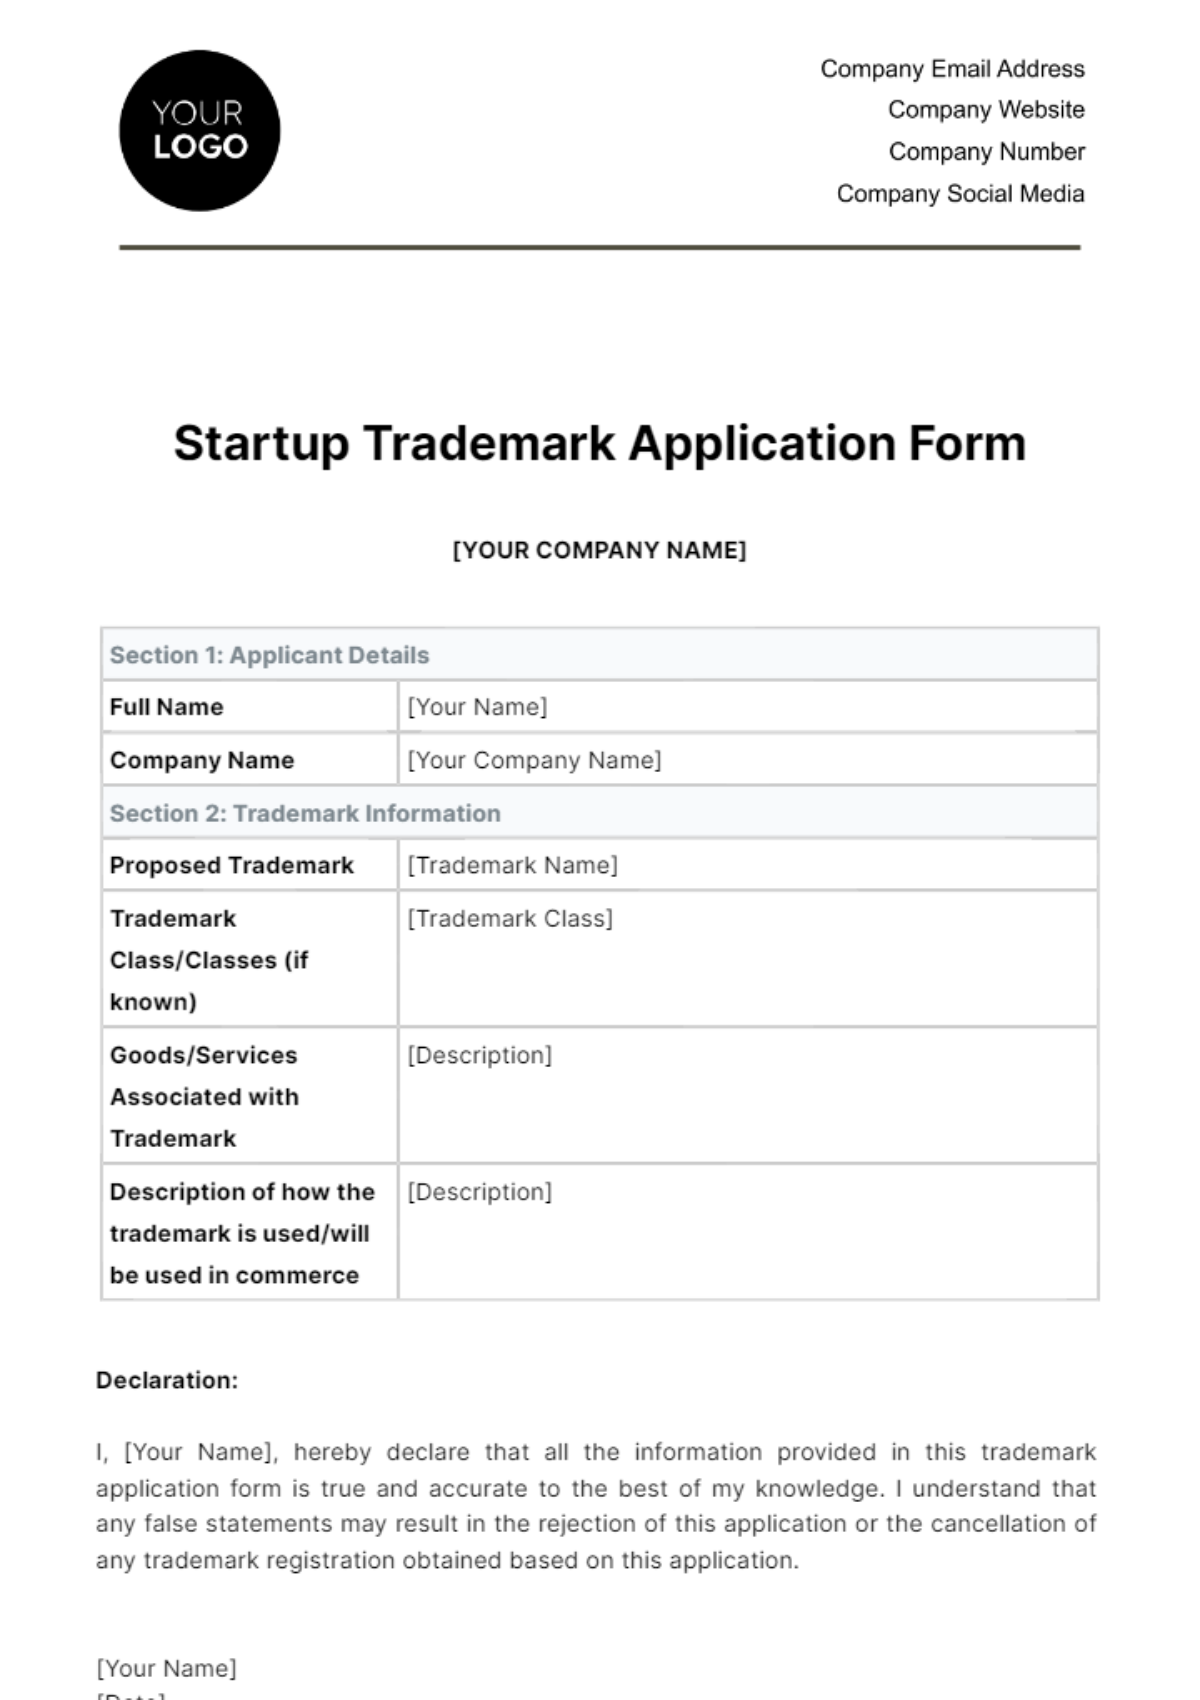 Free Startup Trademark Application Form Template